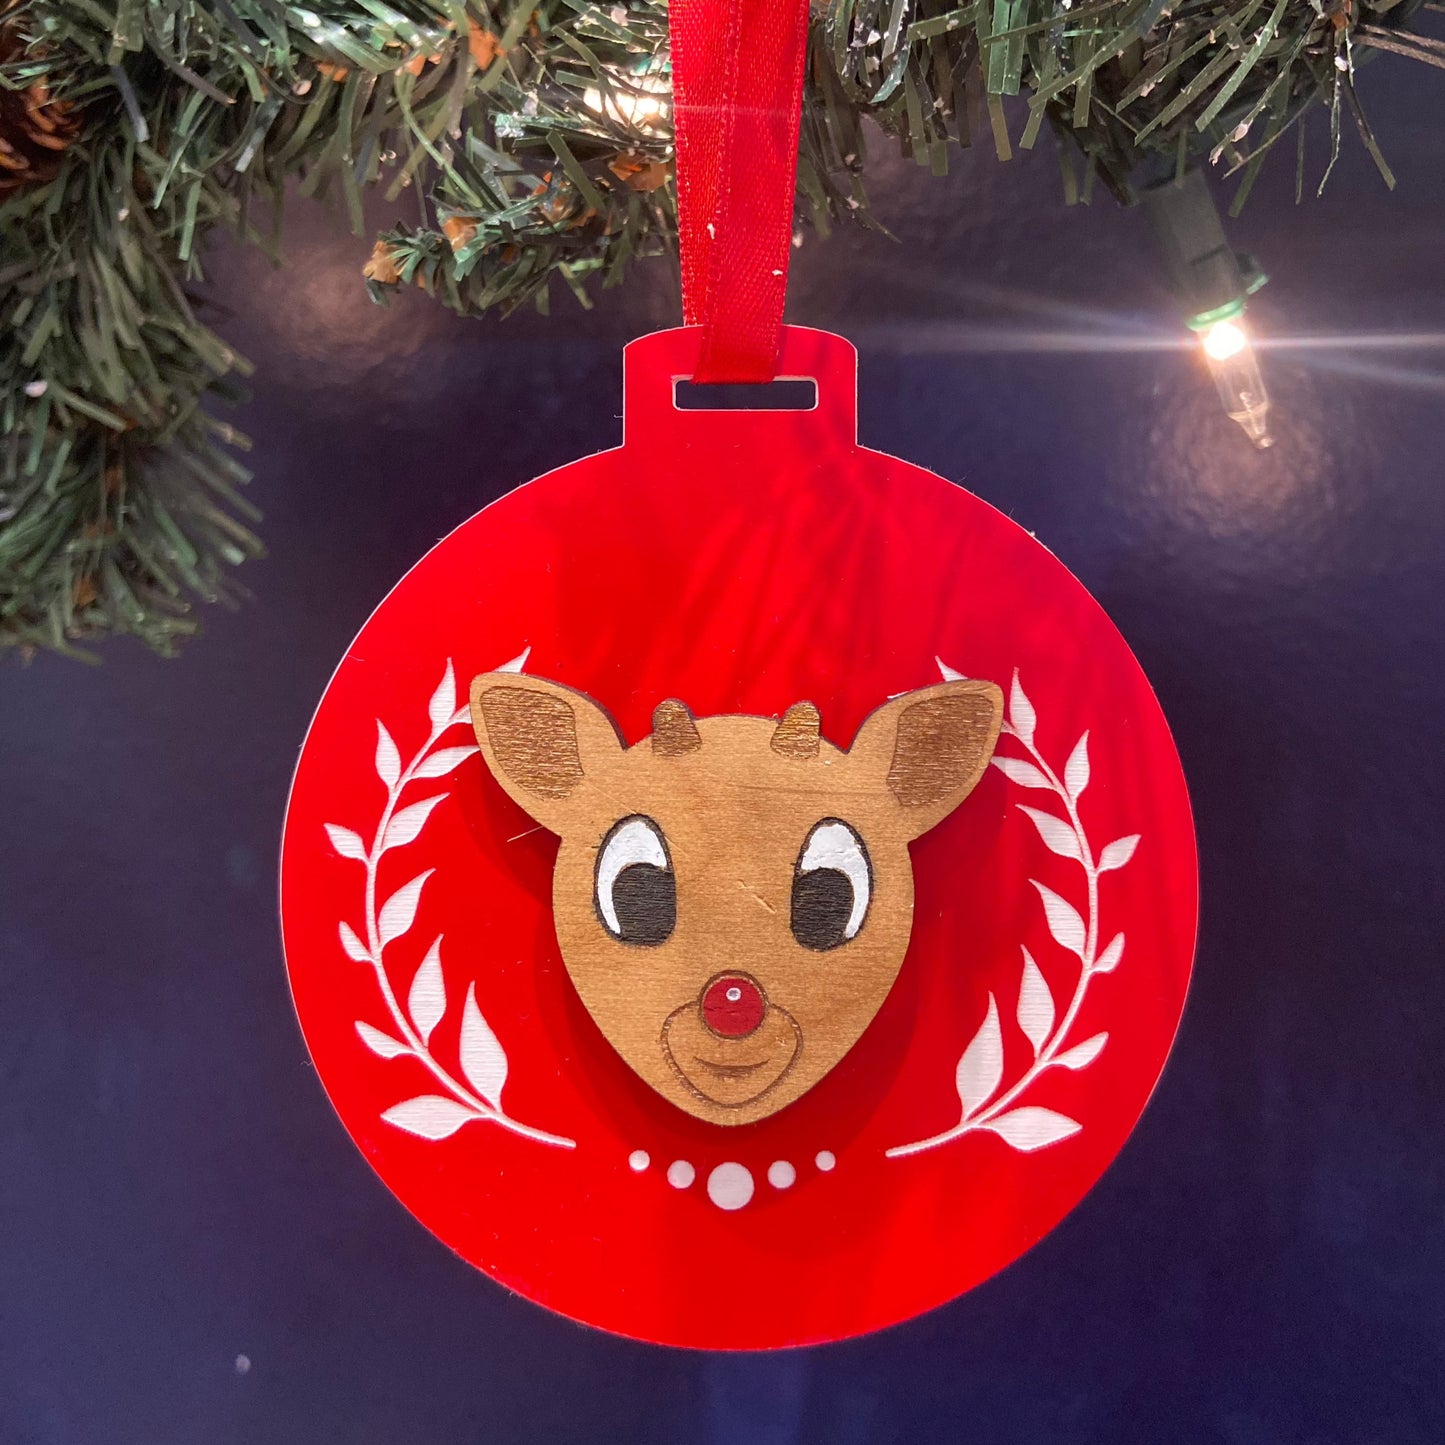 Rudolph Red-Nosed Reindeer Ornament